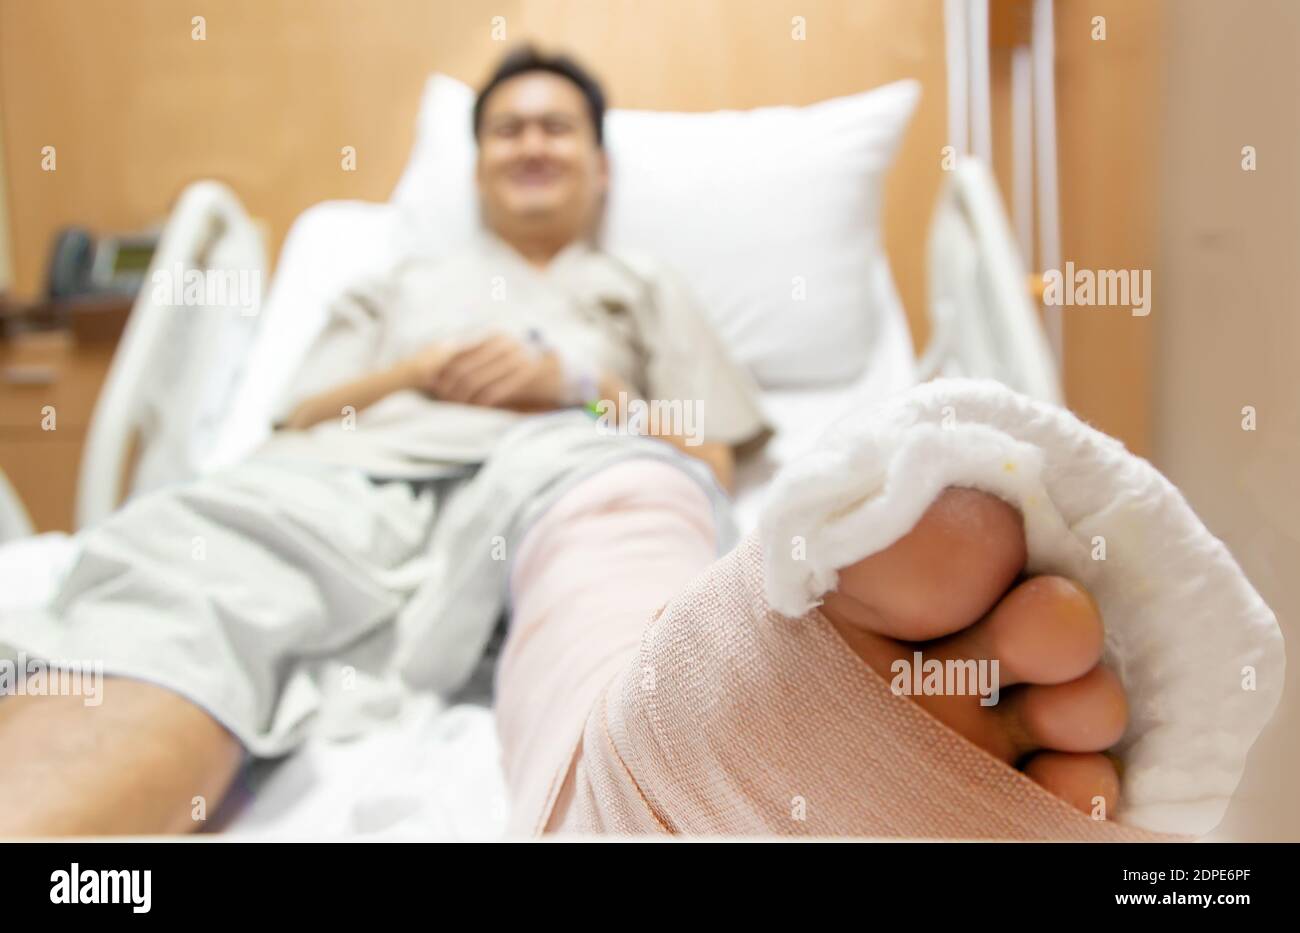 Close-up Of Man With Broken Leg Lying On Bed At Hospital Stock Photo - Alamy